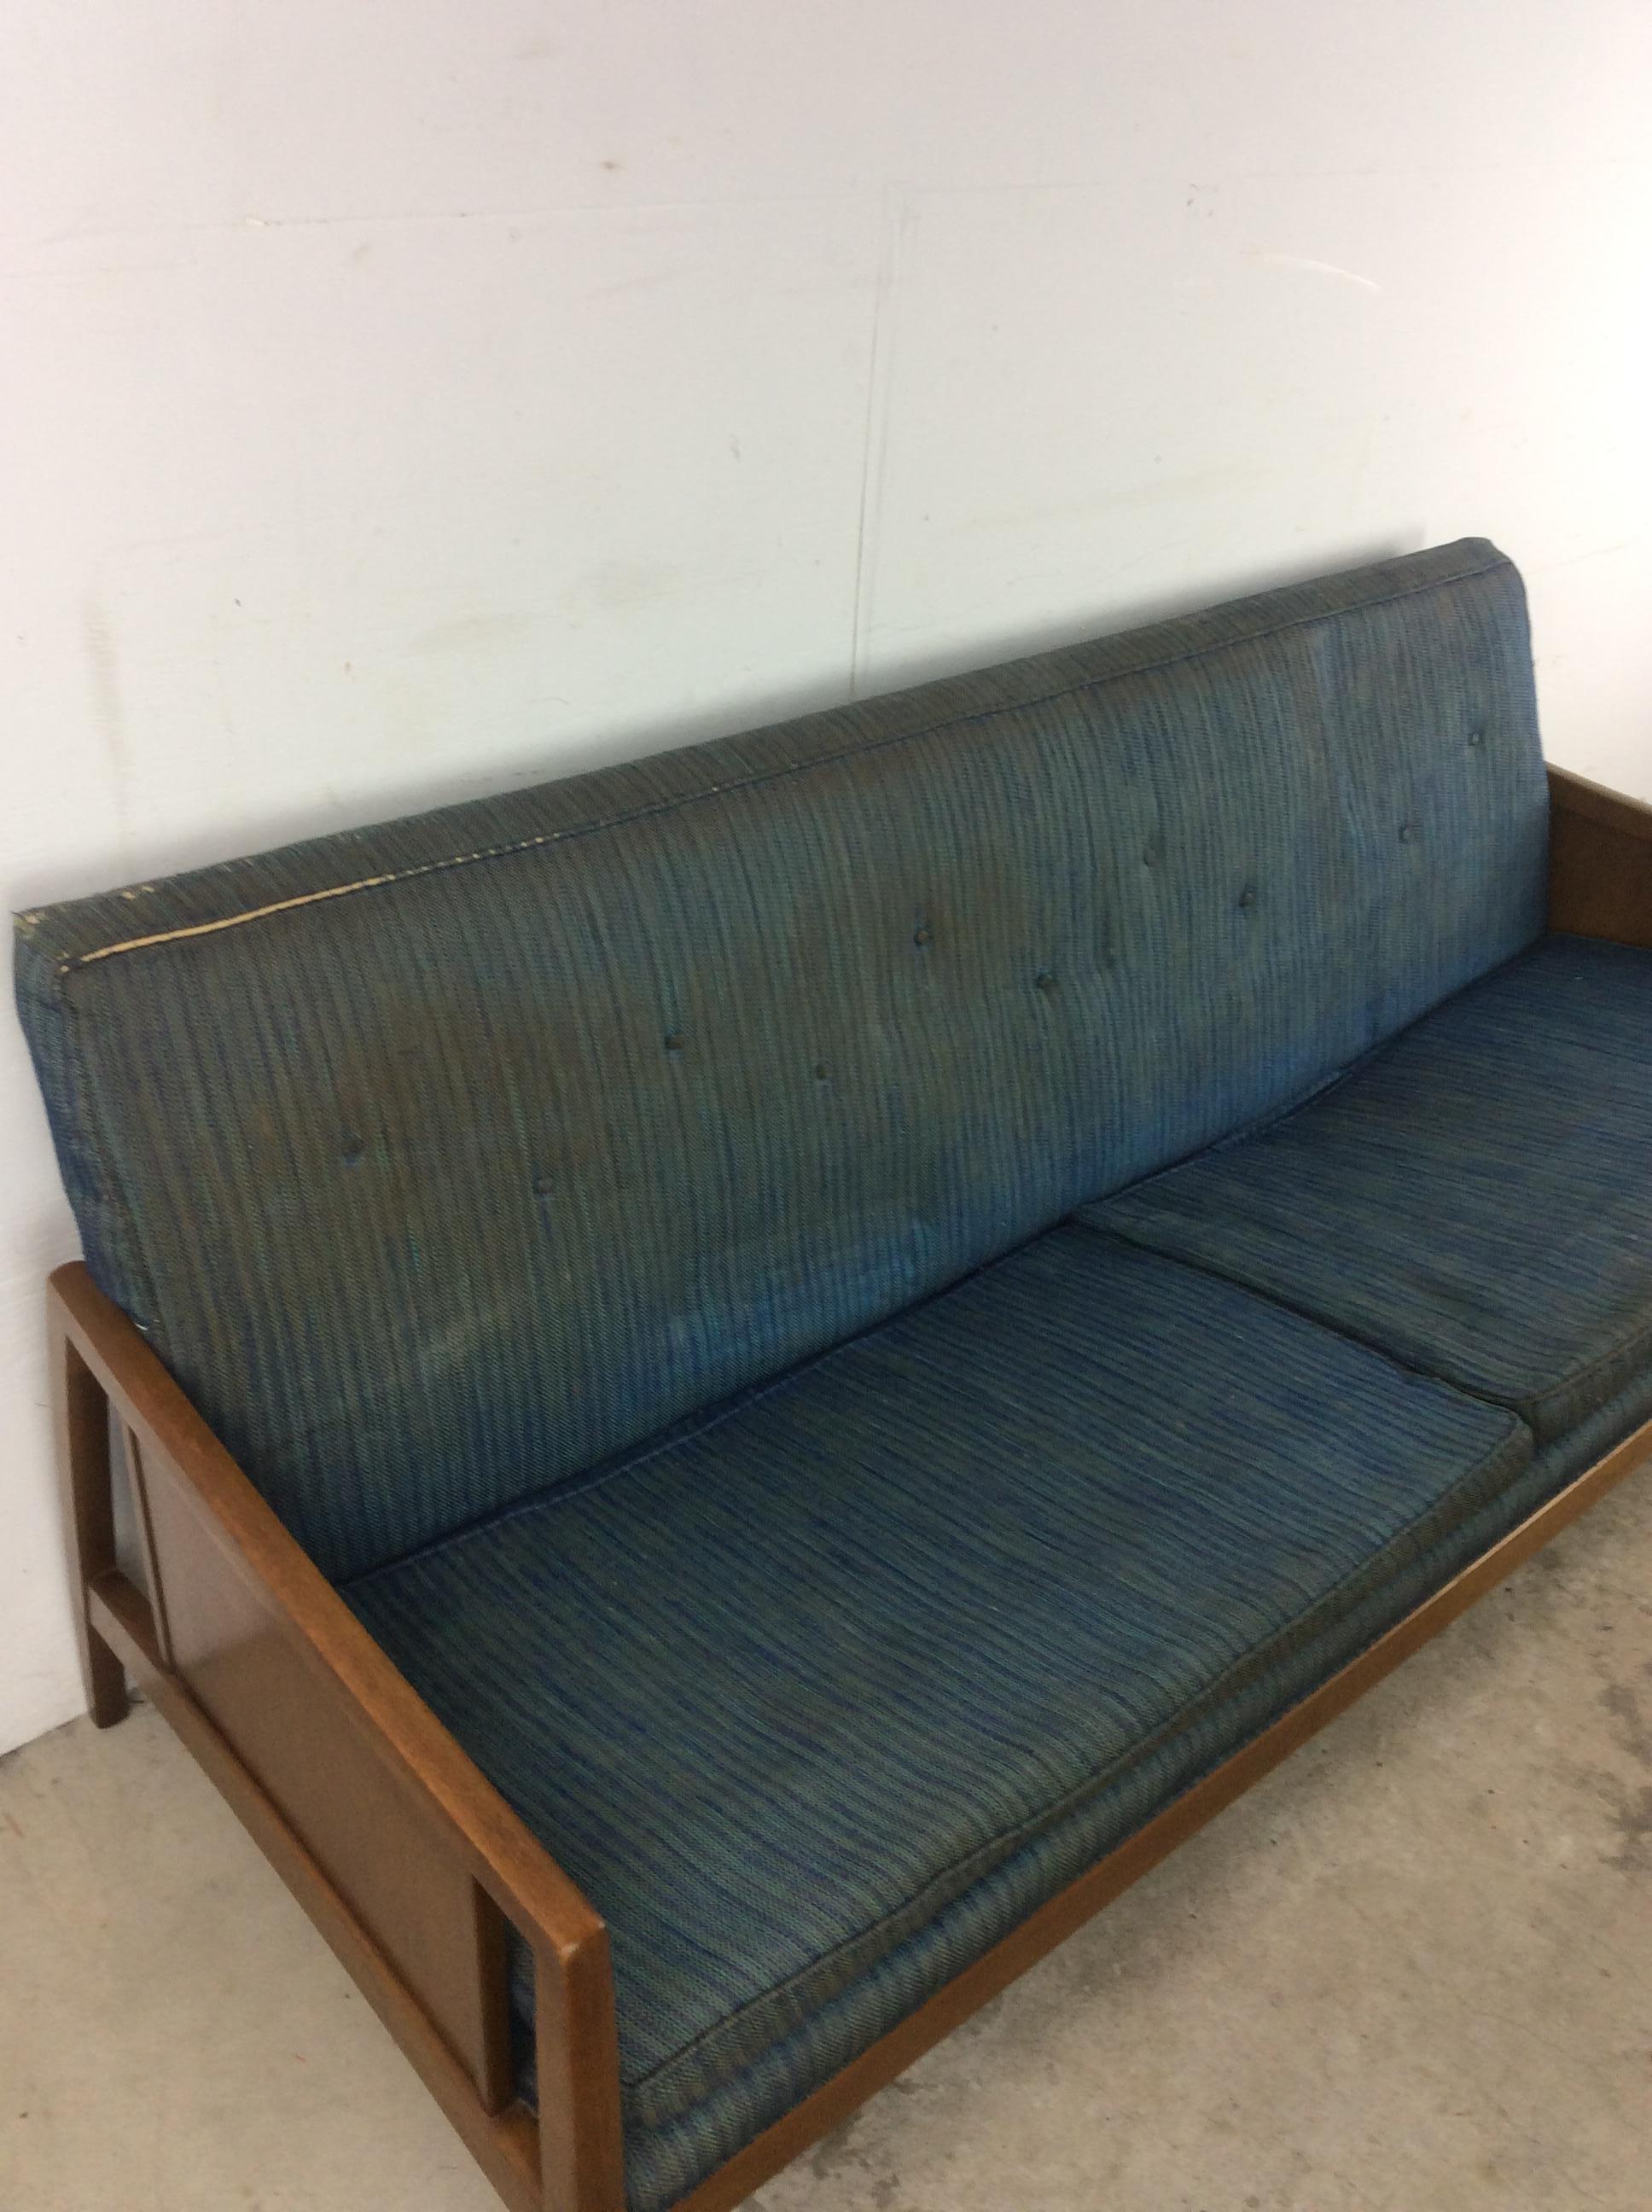 This Mid-Century Modern sofa by Drexel Furniture features hardwood construction, original walnut finish, vintage blue upholstery with removable cushions, beautifully crafted armrests & tapered legs. 

Reupholstery is ORIGINALLY. And heavily worn.